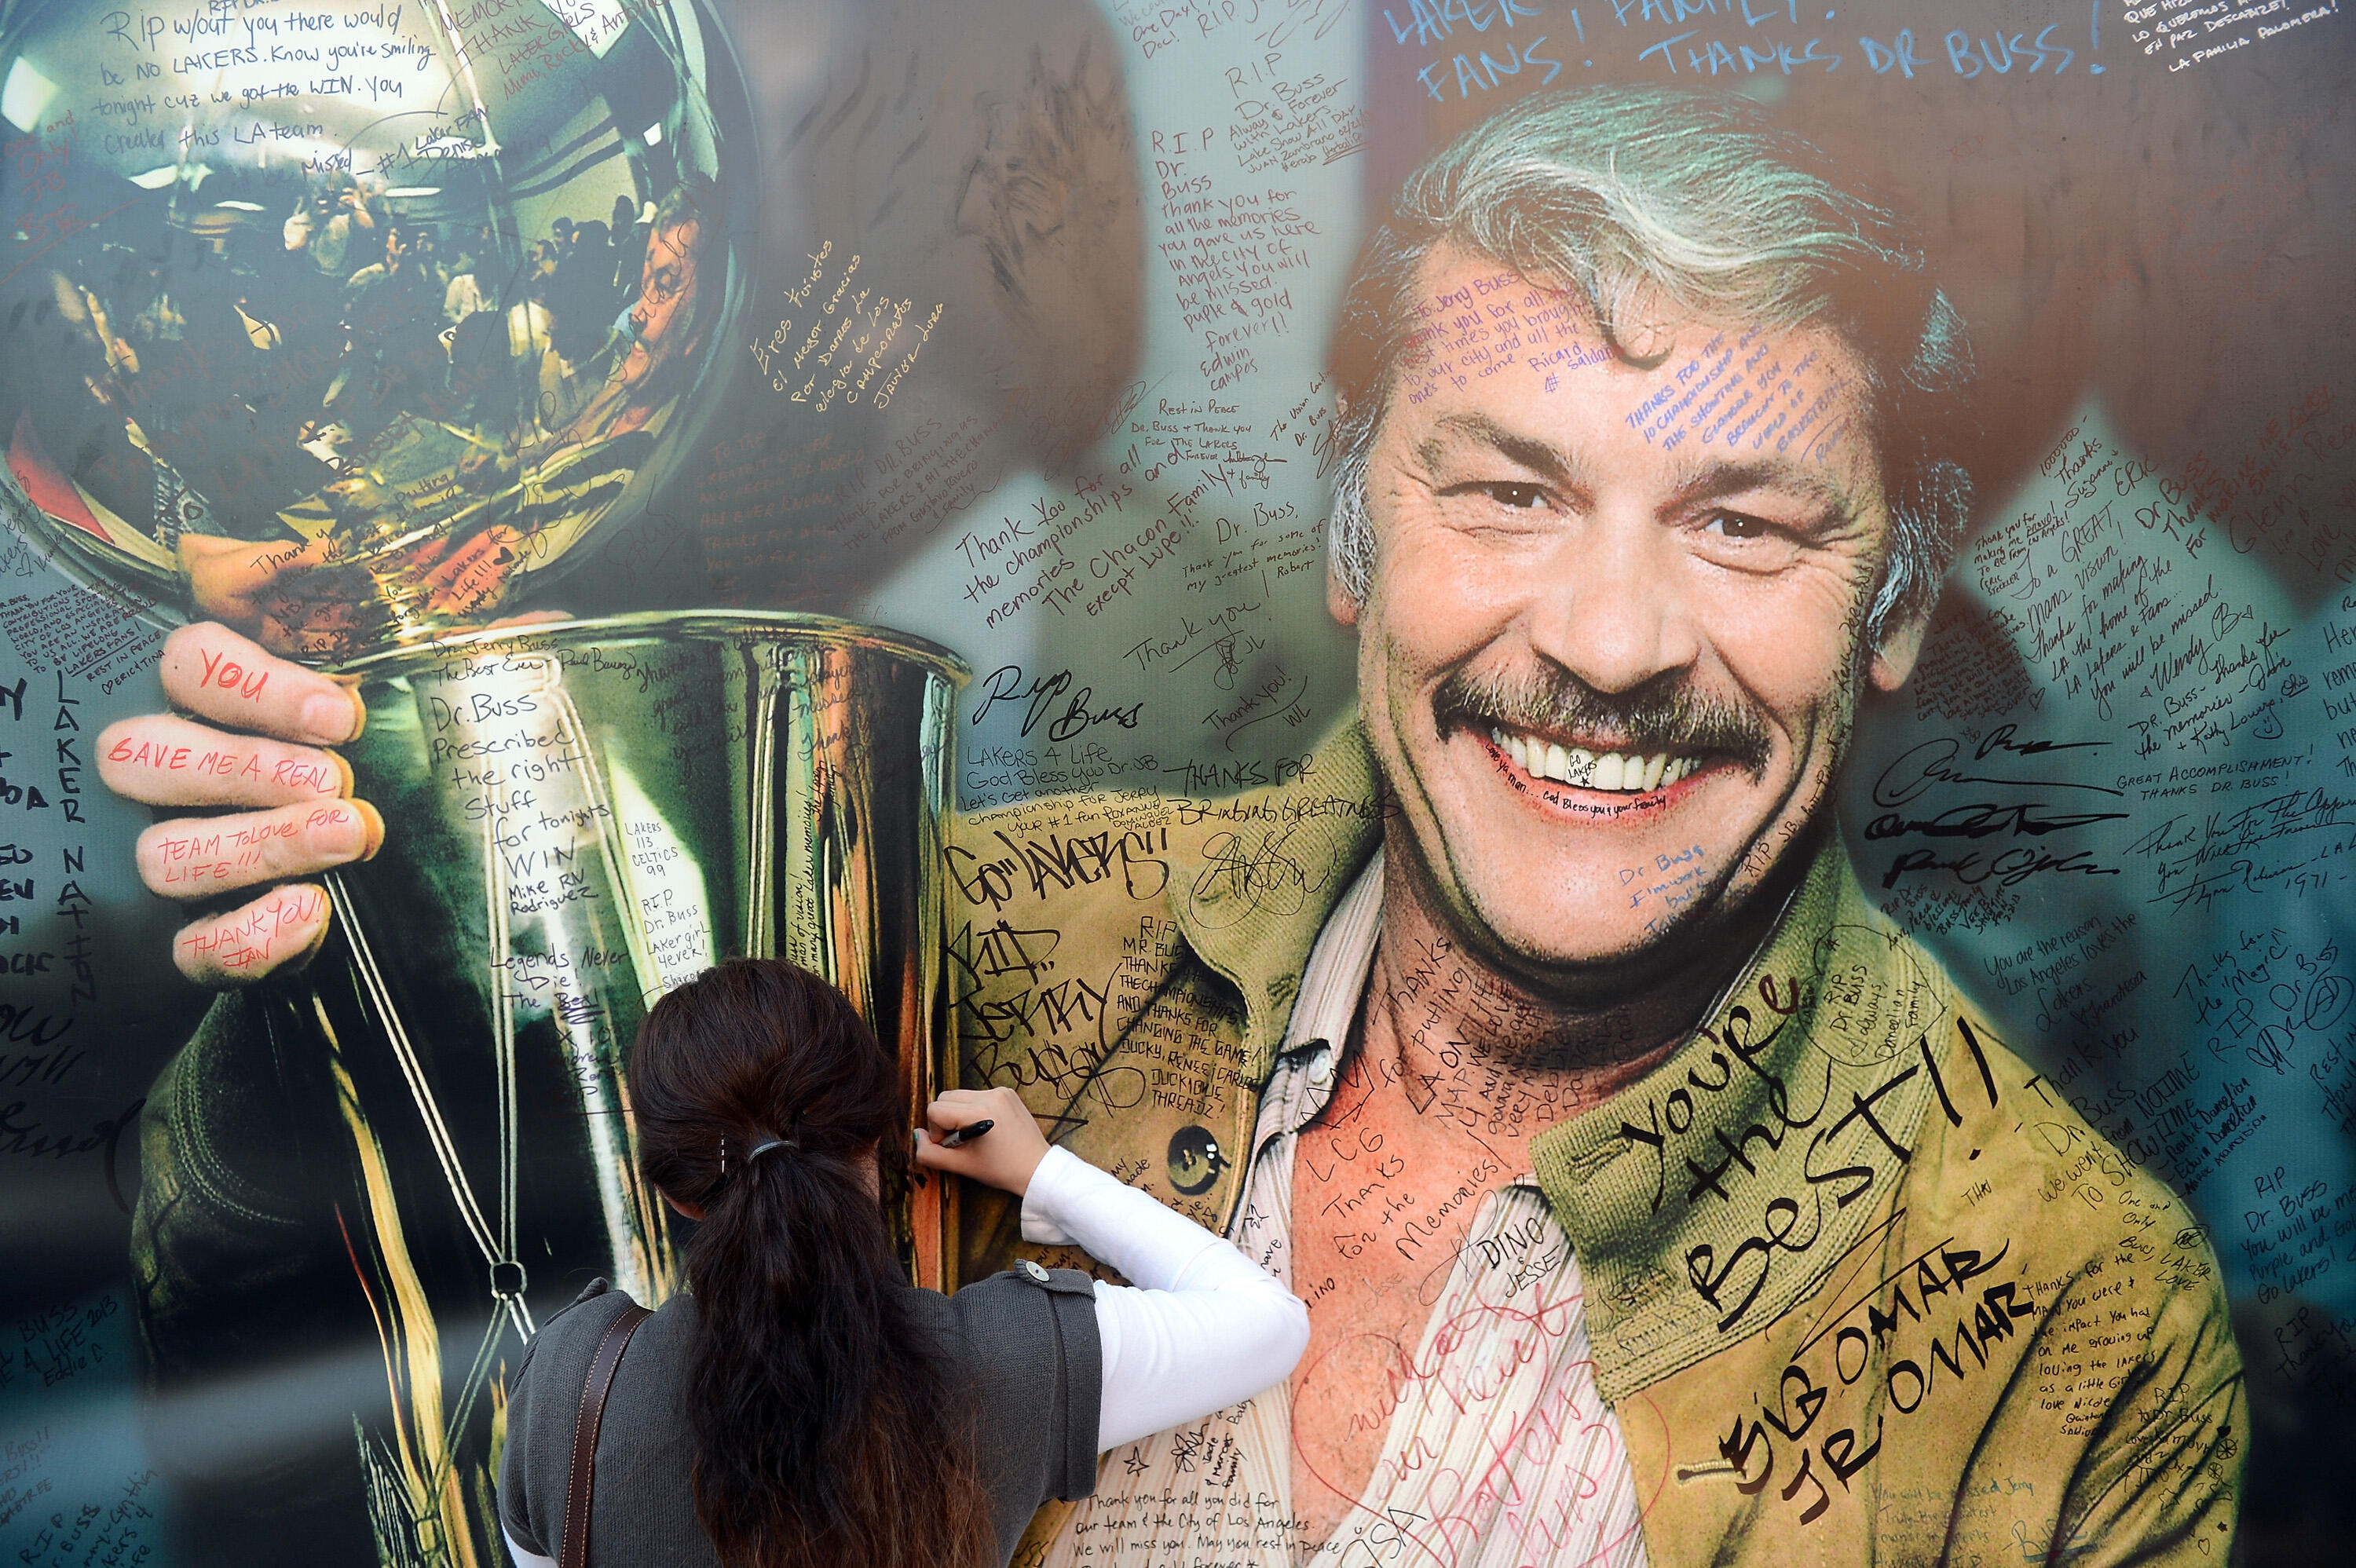 LOS ANGELES, CA - FEBRUARY 21:  Fans sign the display of Dr. Jerry Buss after his memorail service outside the Nokia Theatre L.A. Live on February 21, 2013 in Los Angeles, California.  (Photo by Harry How/Getty Images)